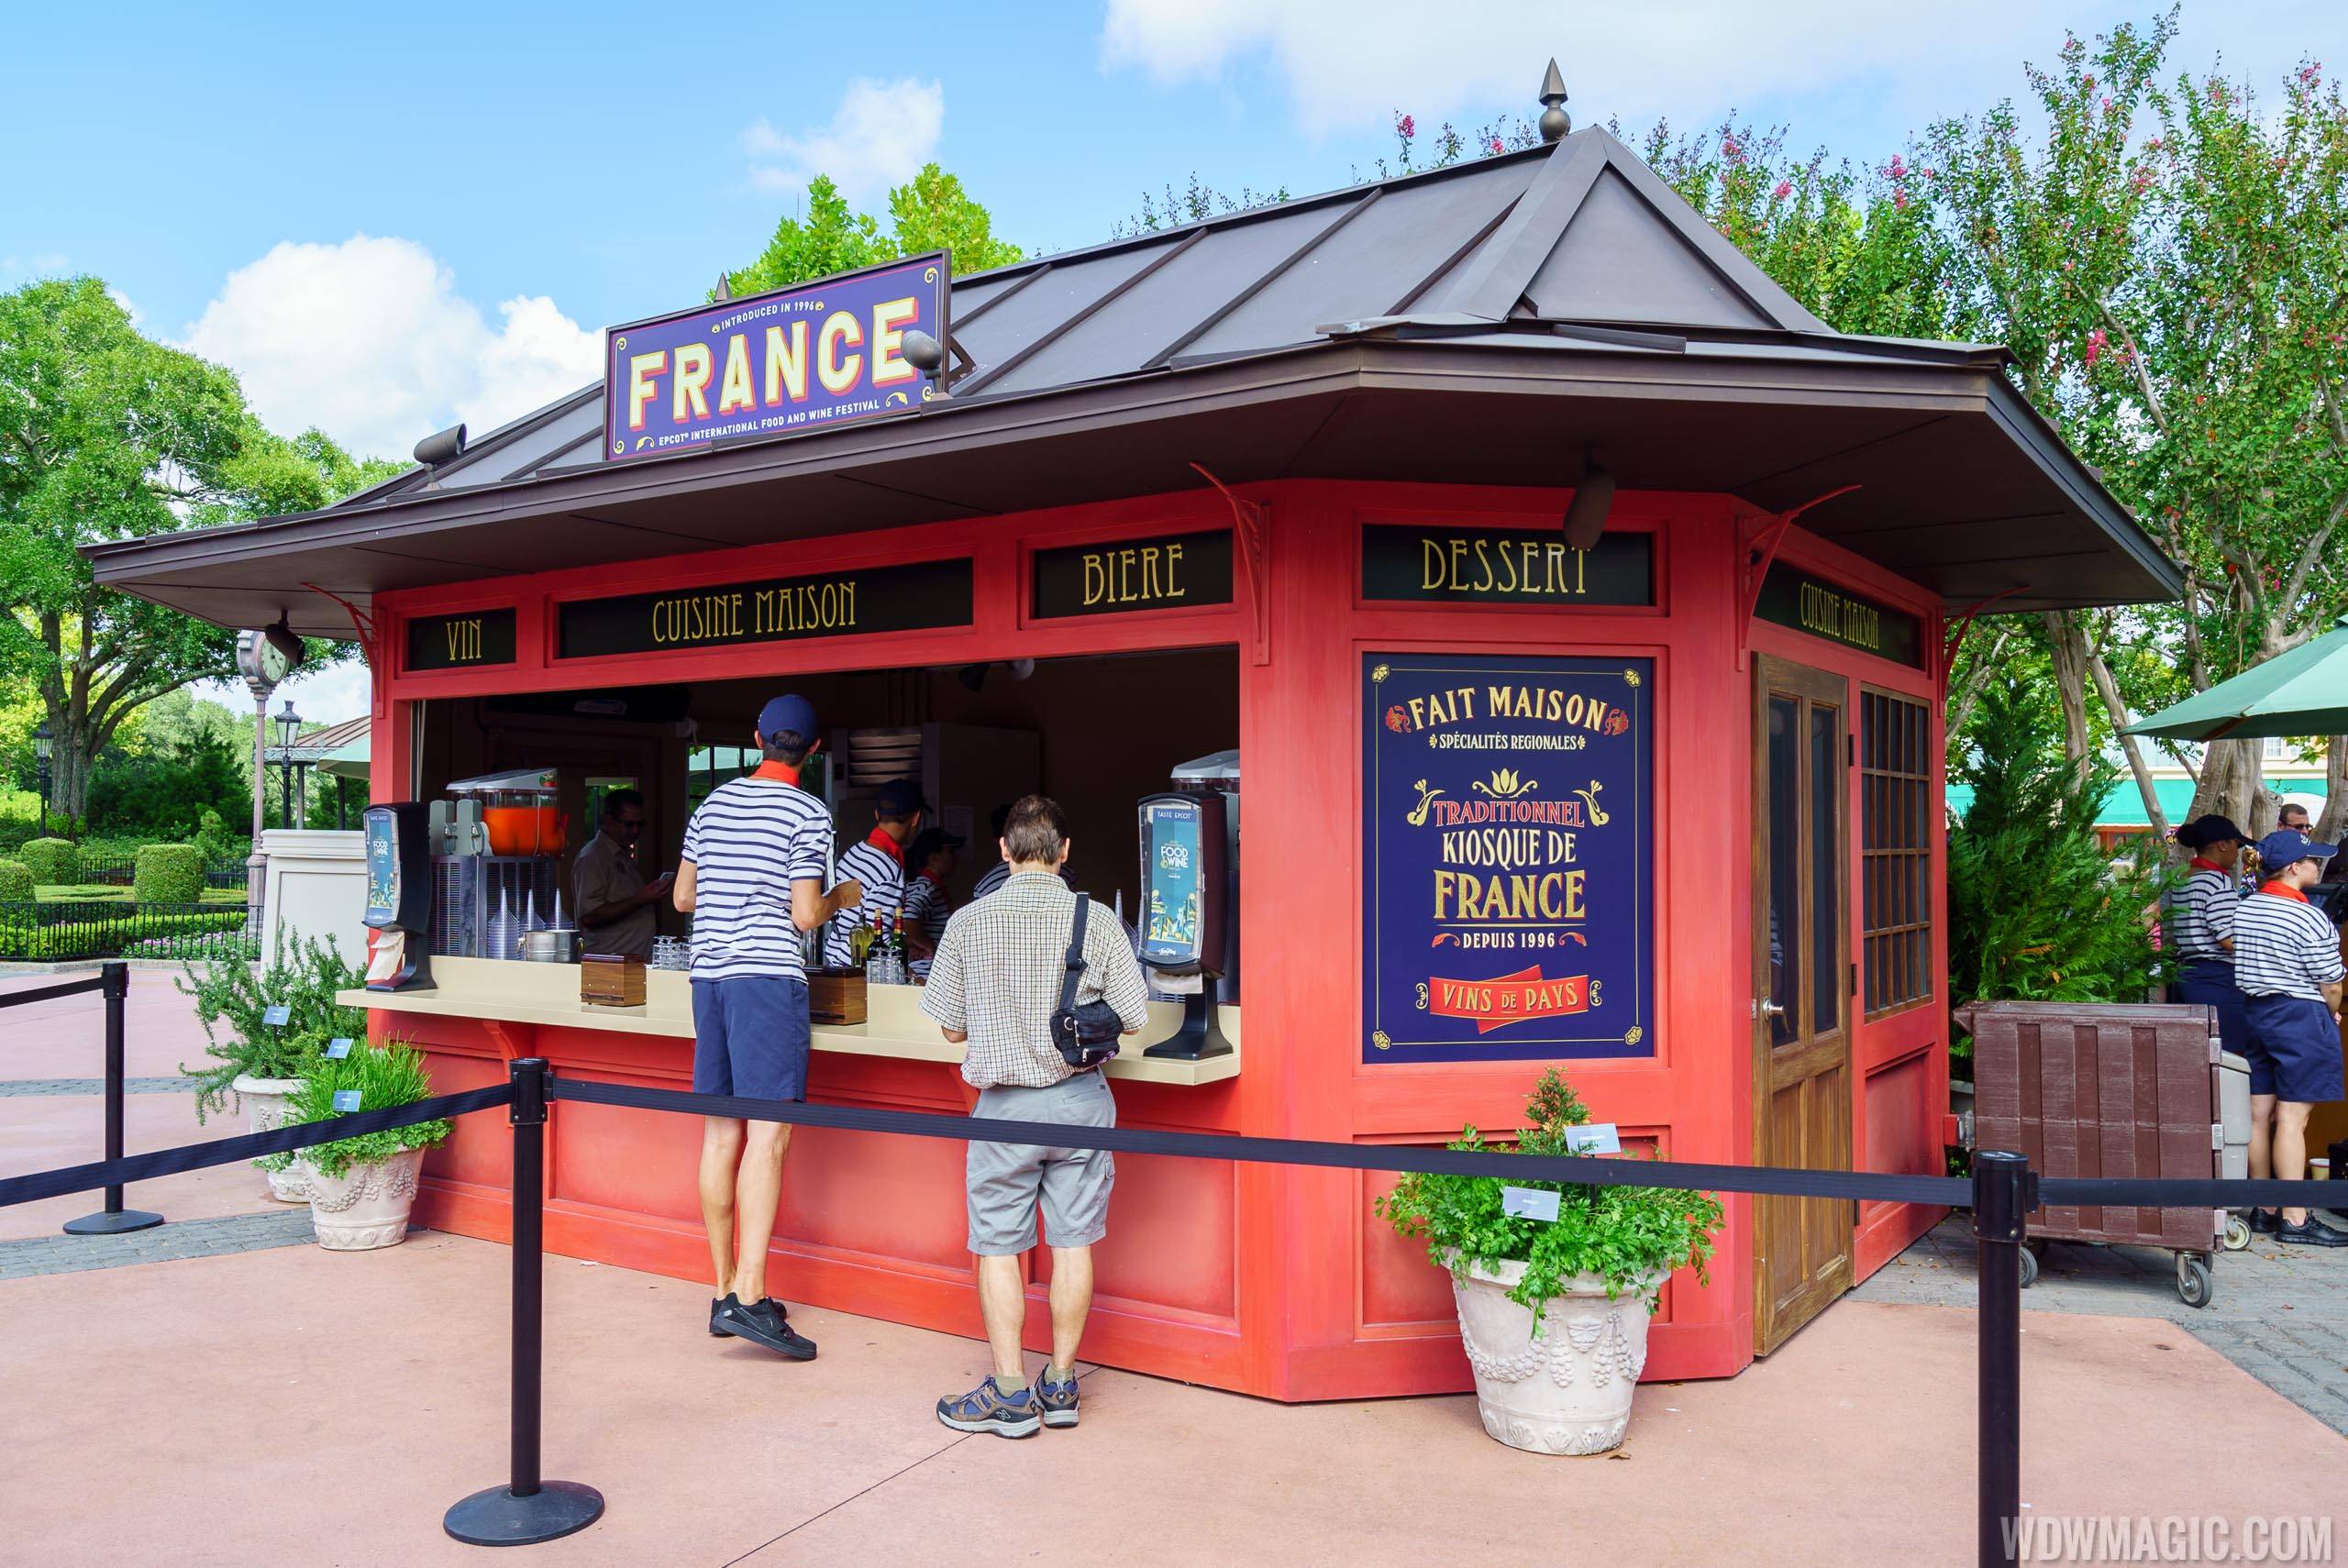 2016 Epcot Food and Wine Festival - France kiosk